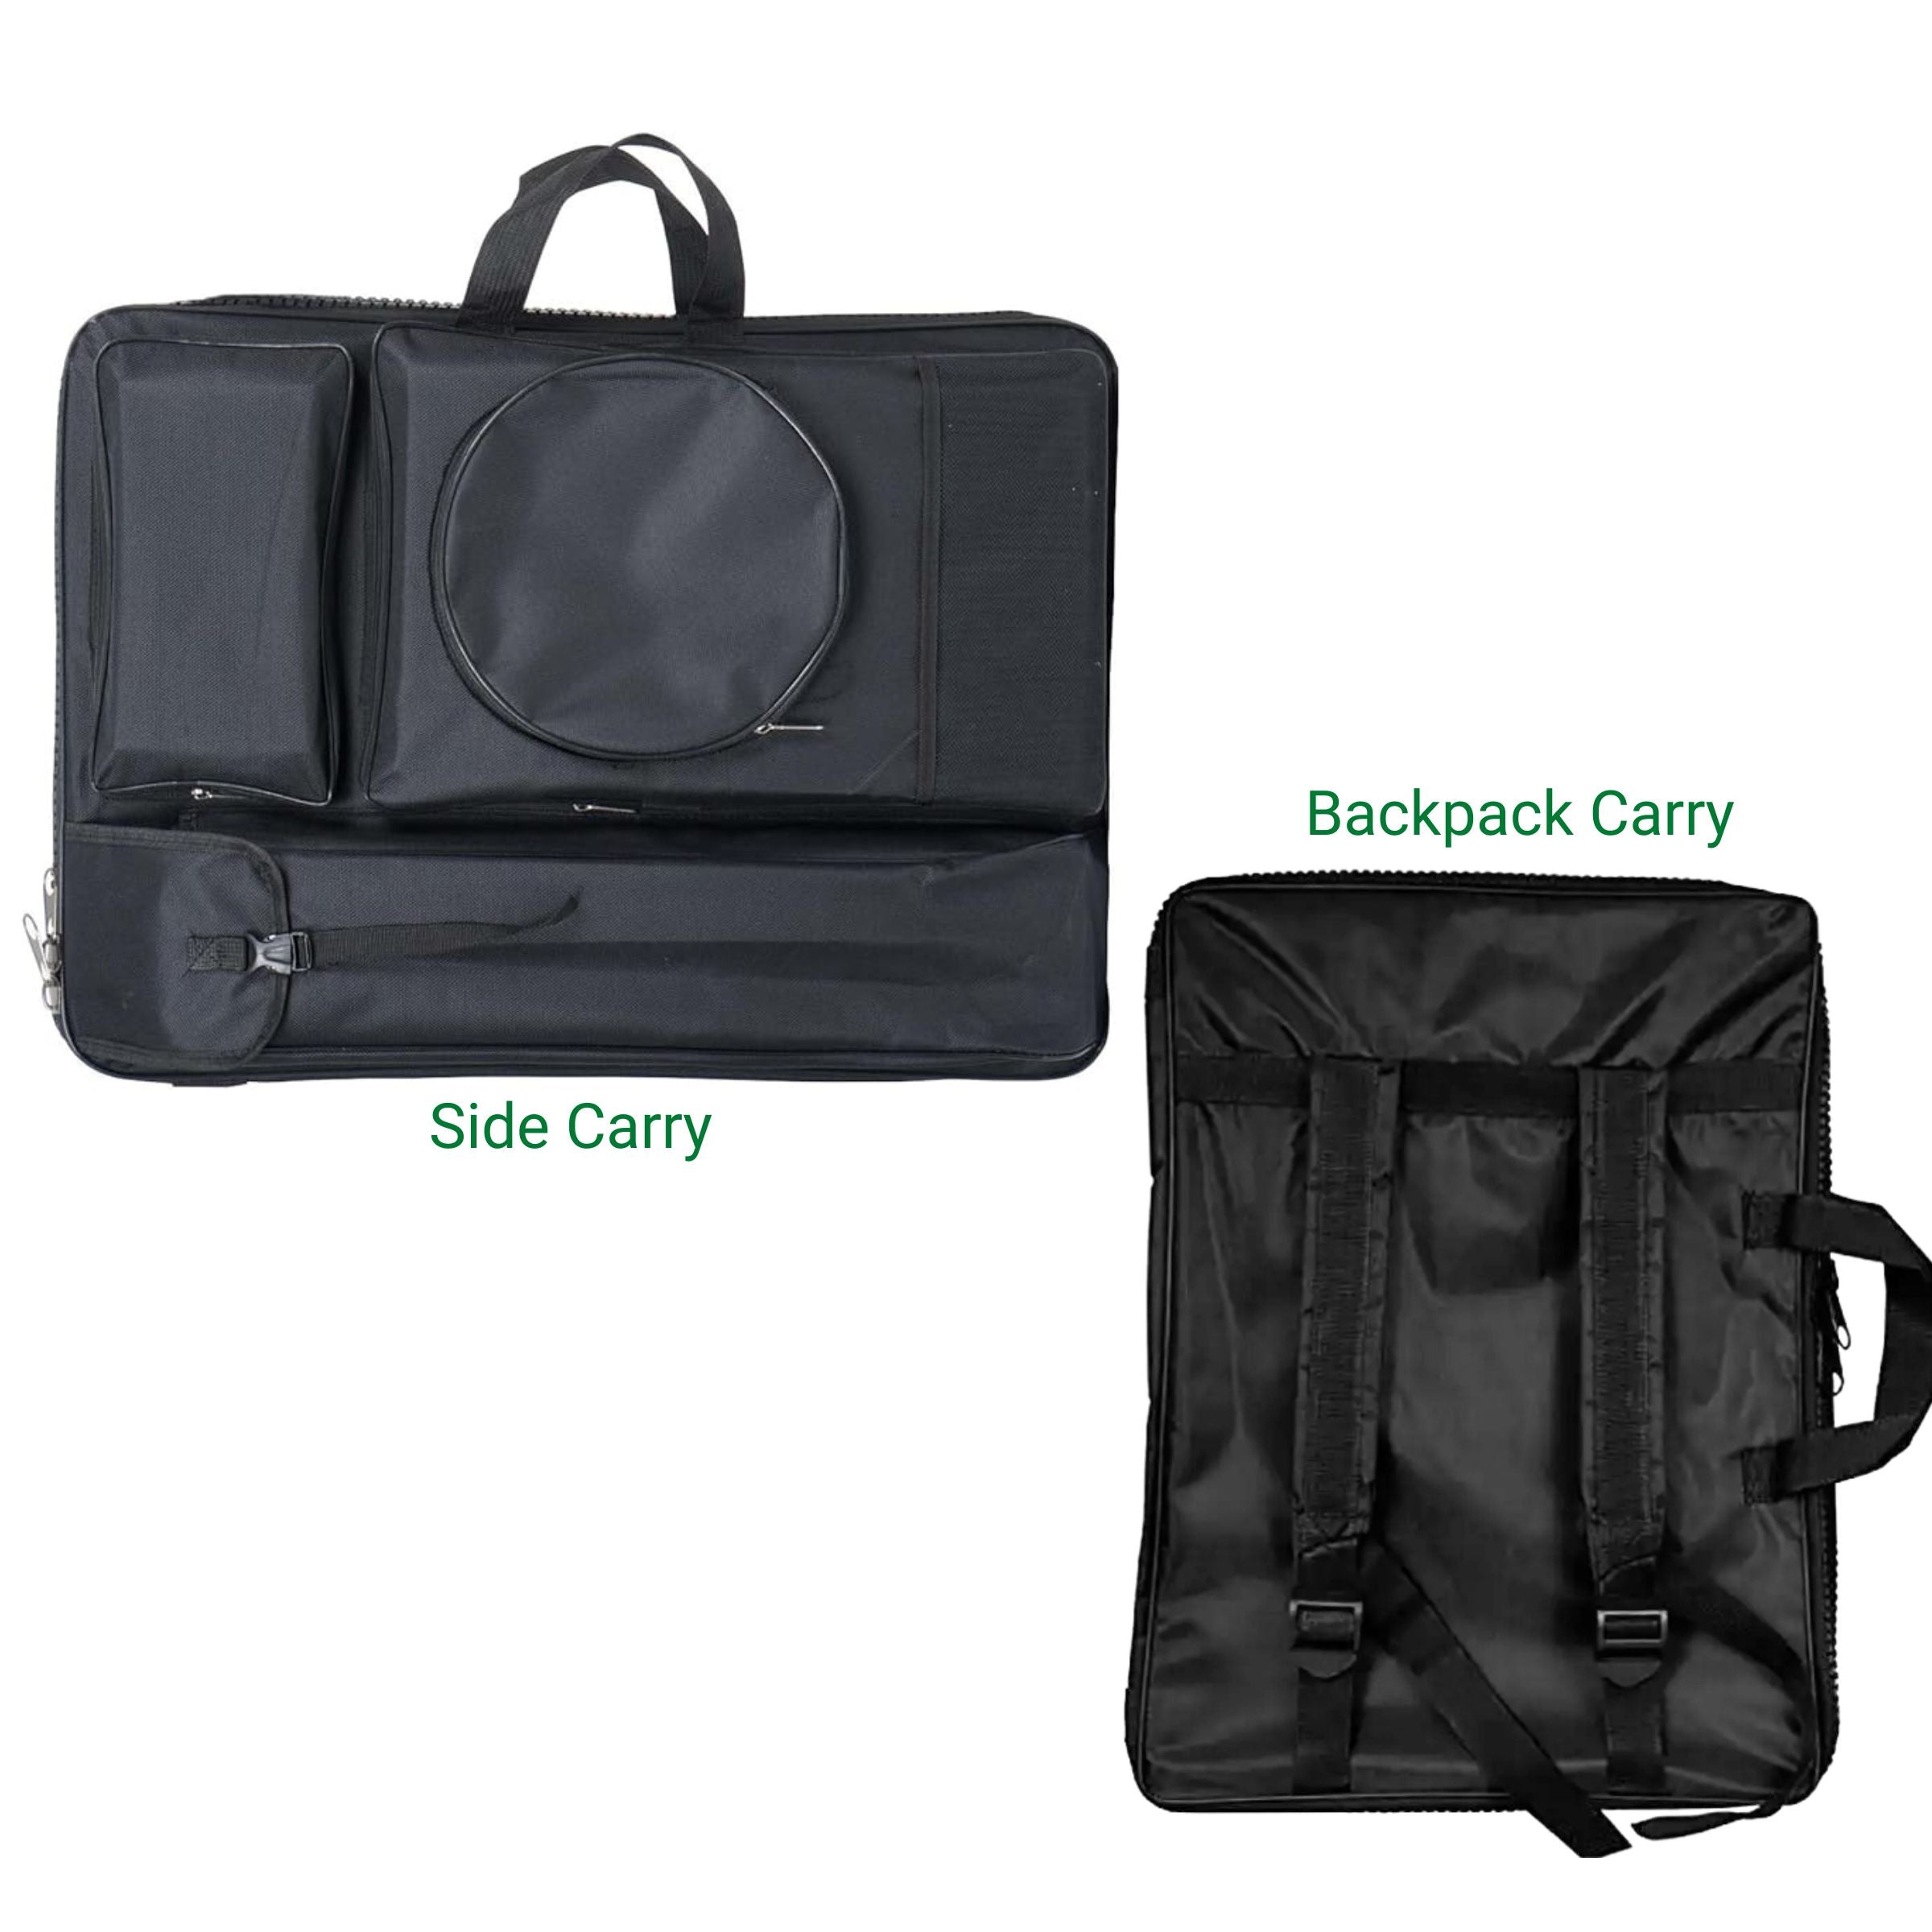 Lillipack Accessory Storage Backpack